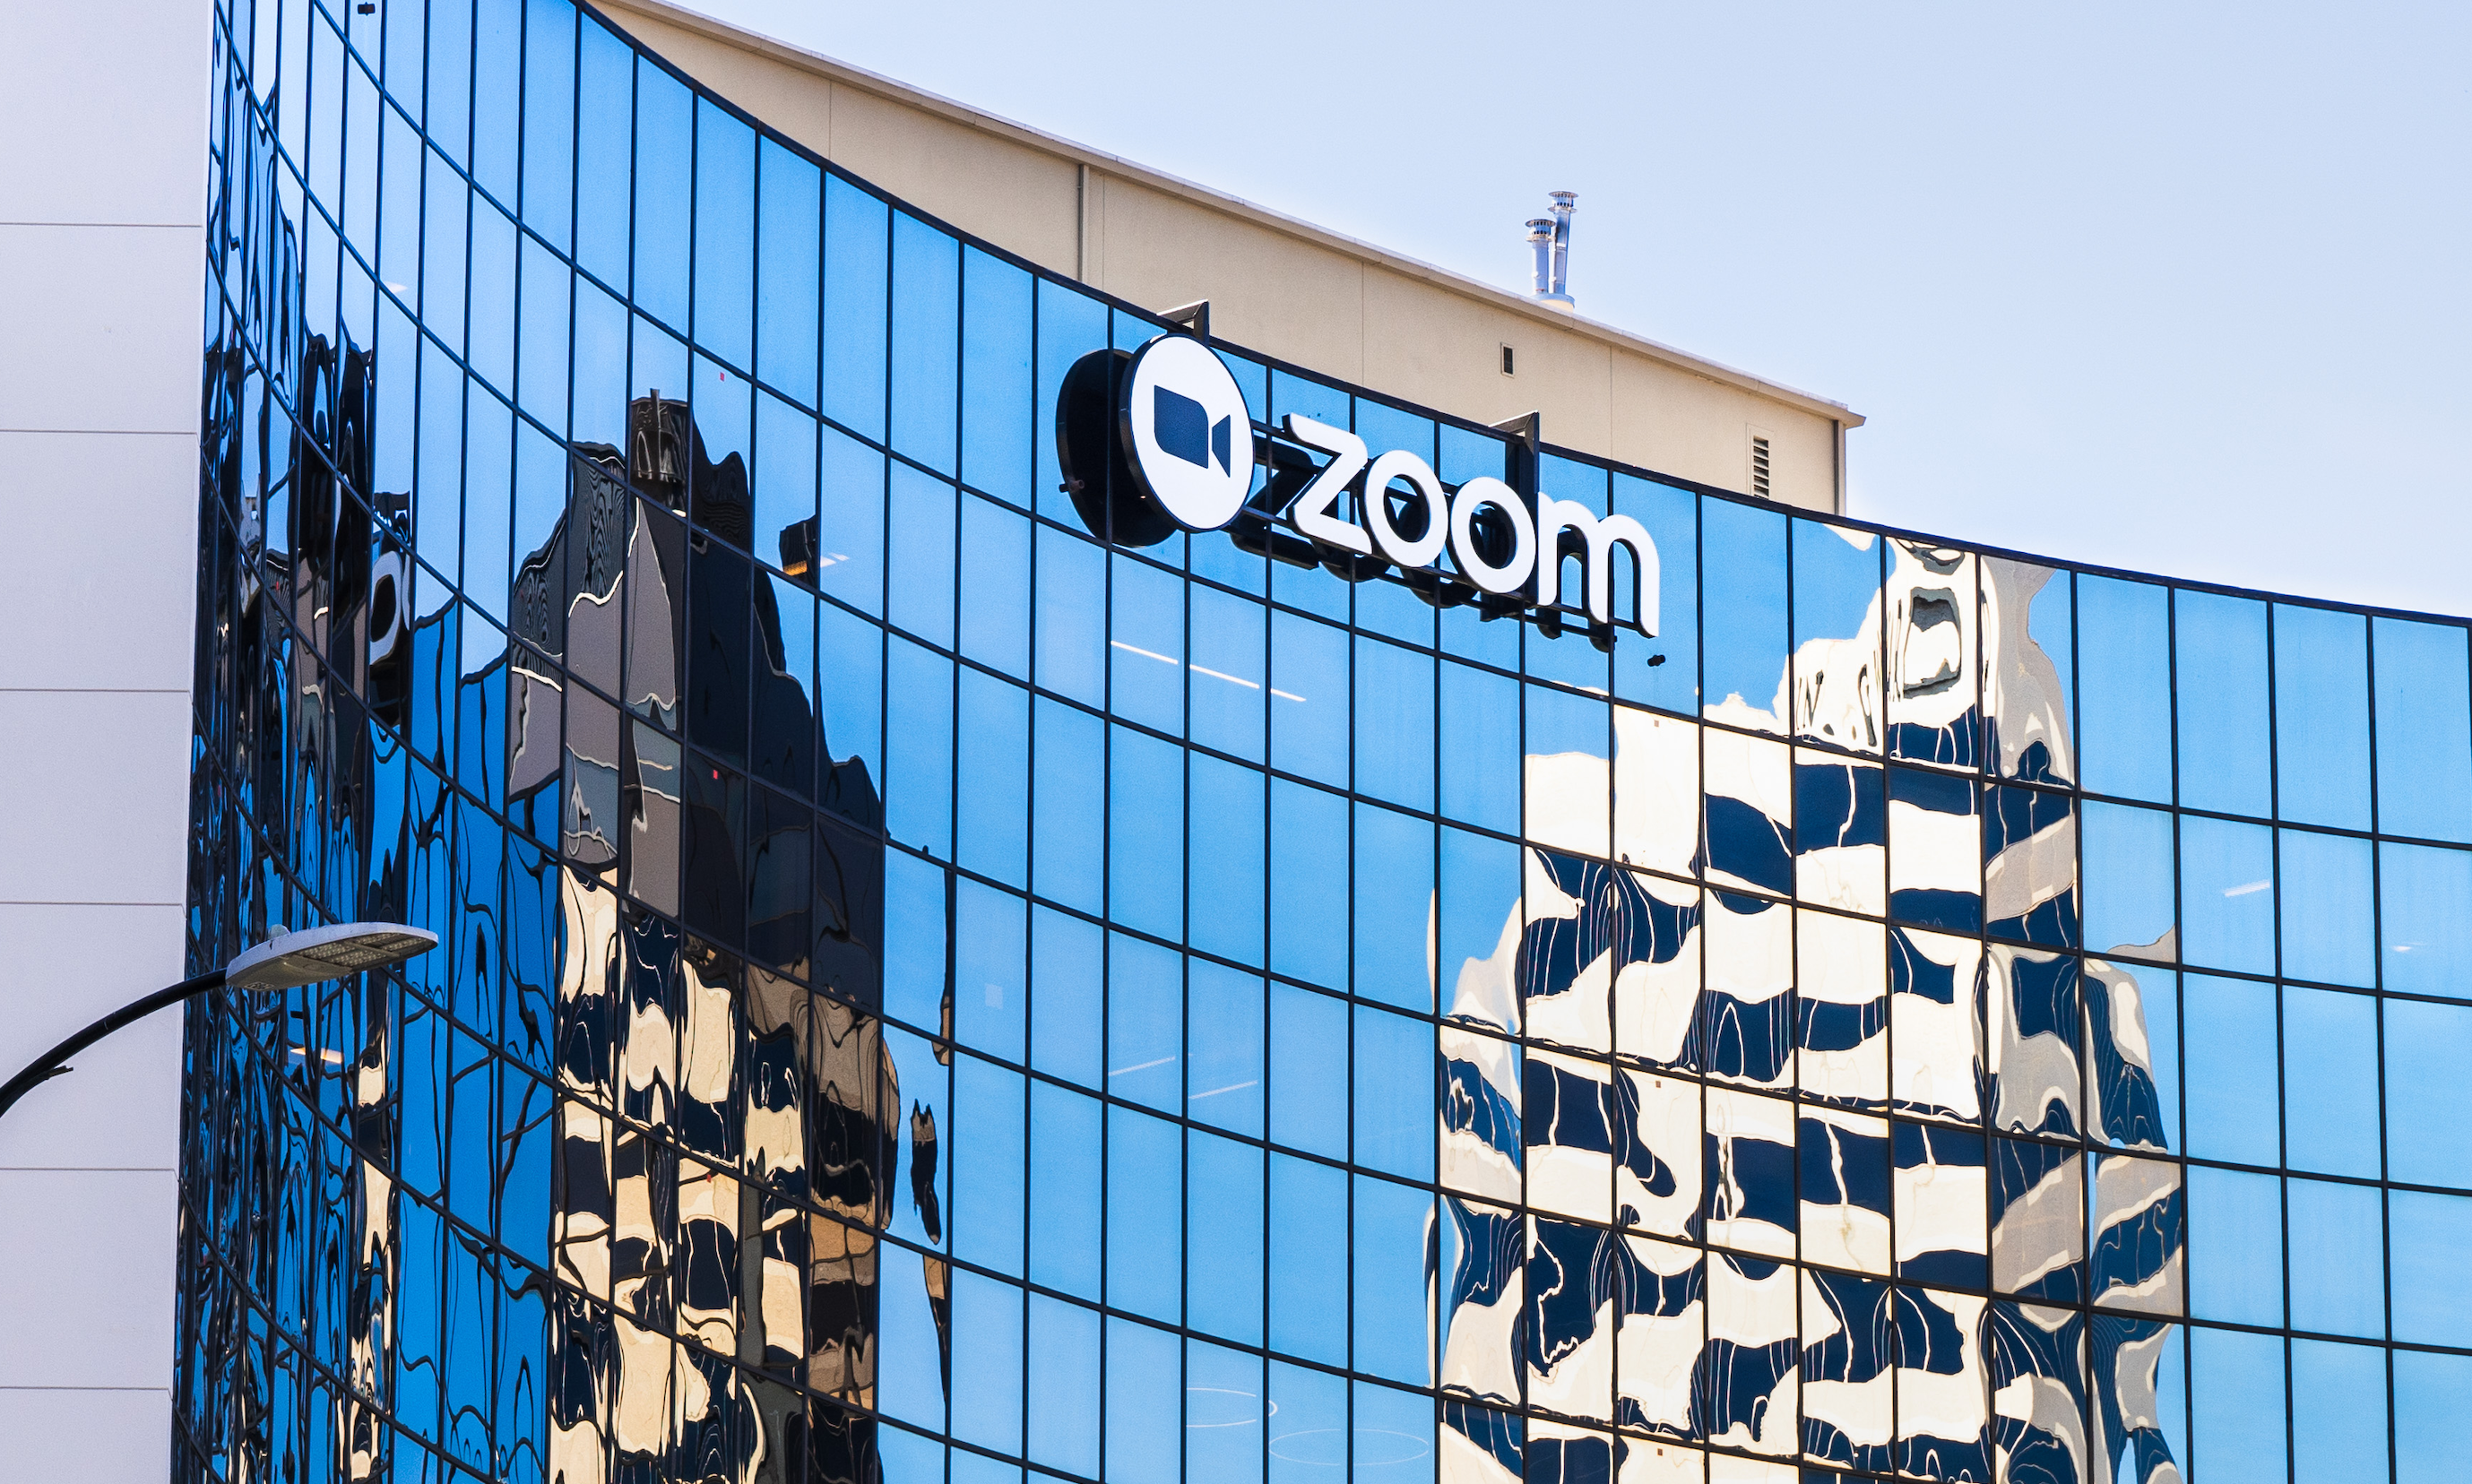 zoom keybase app kept chat from